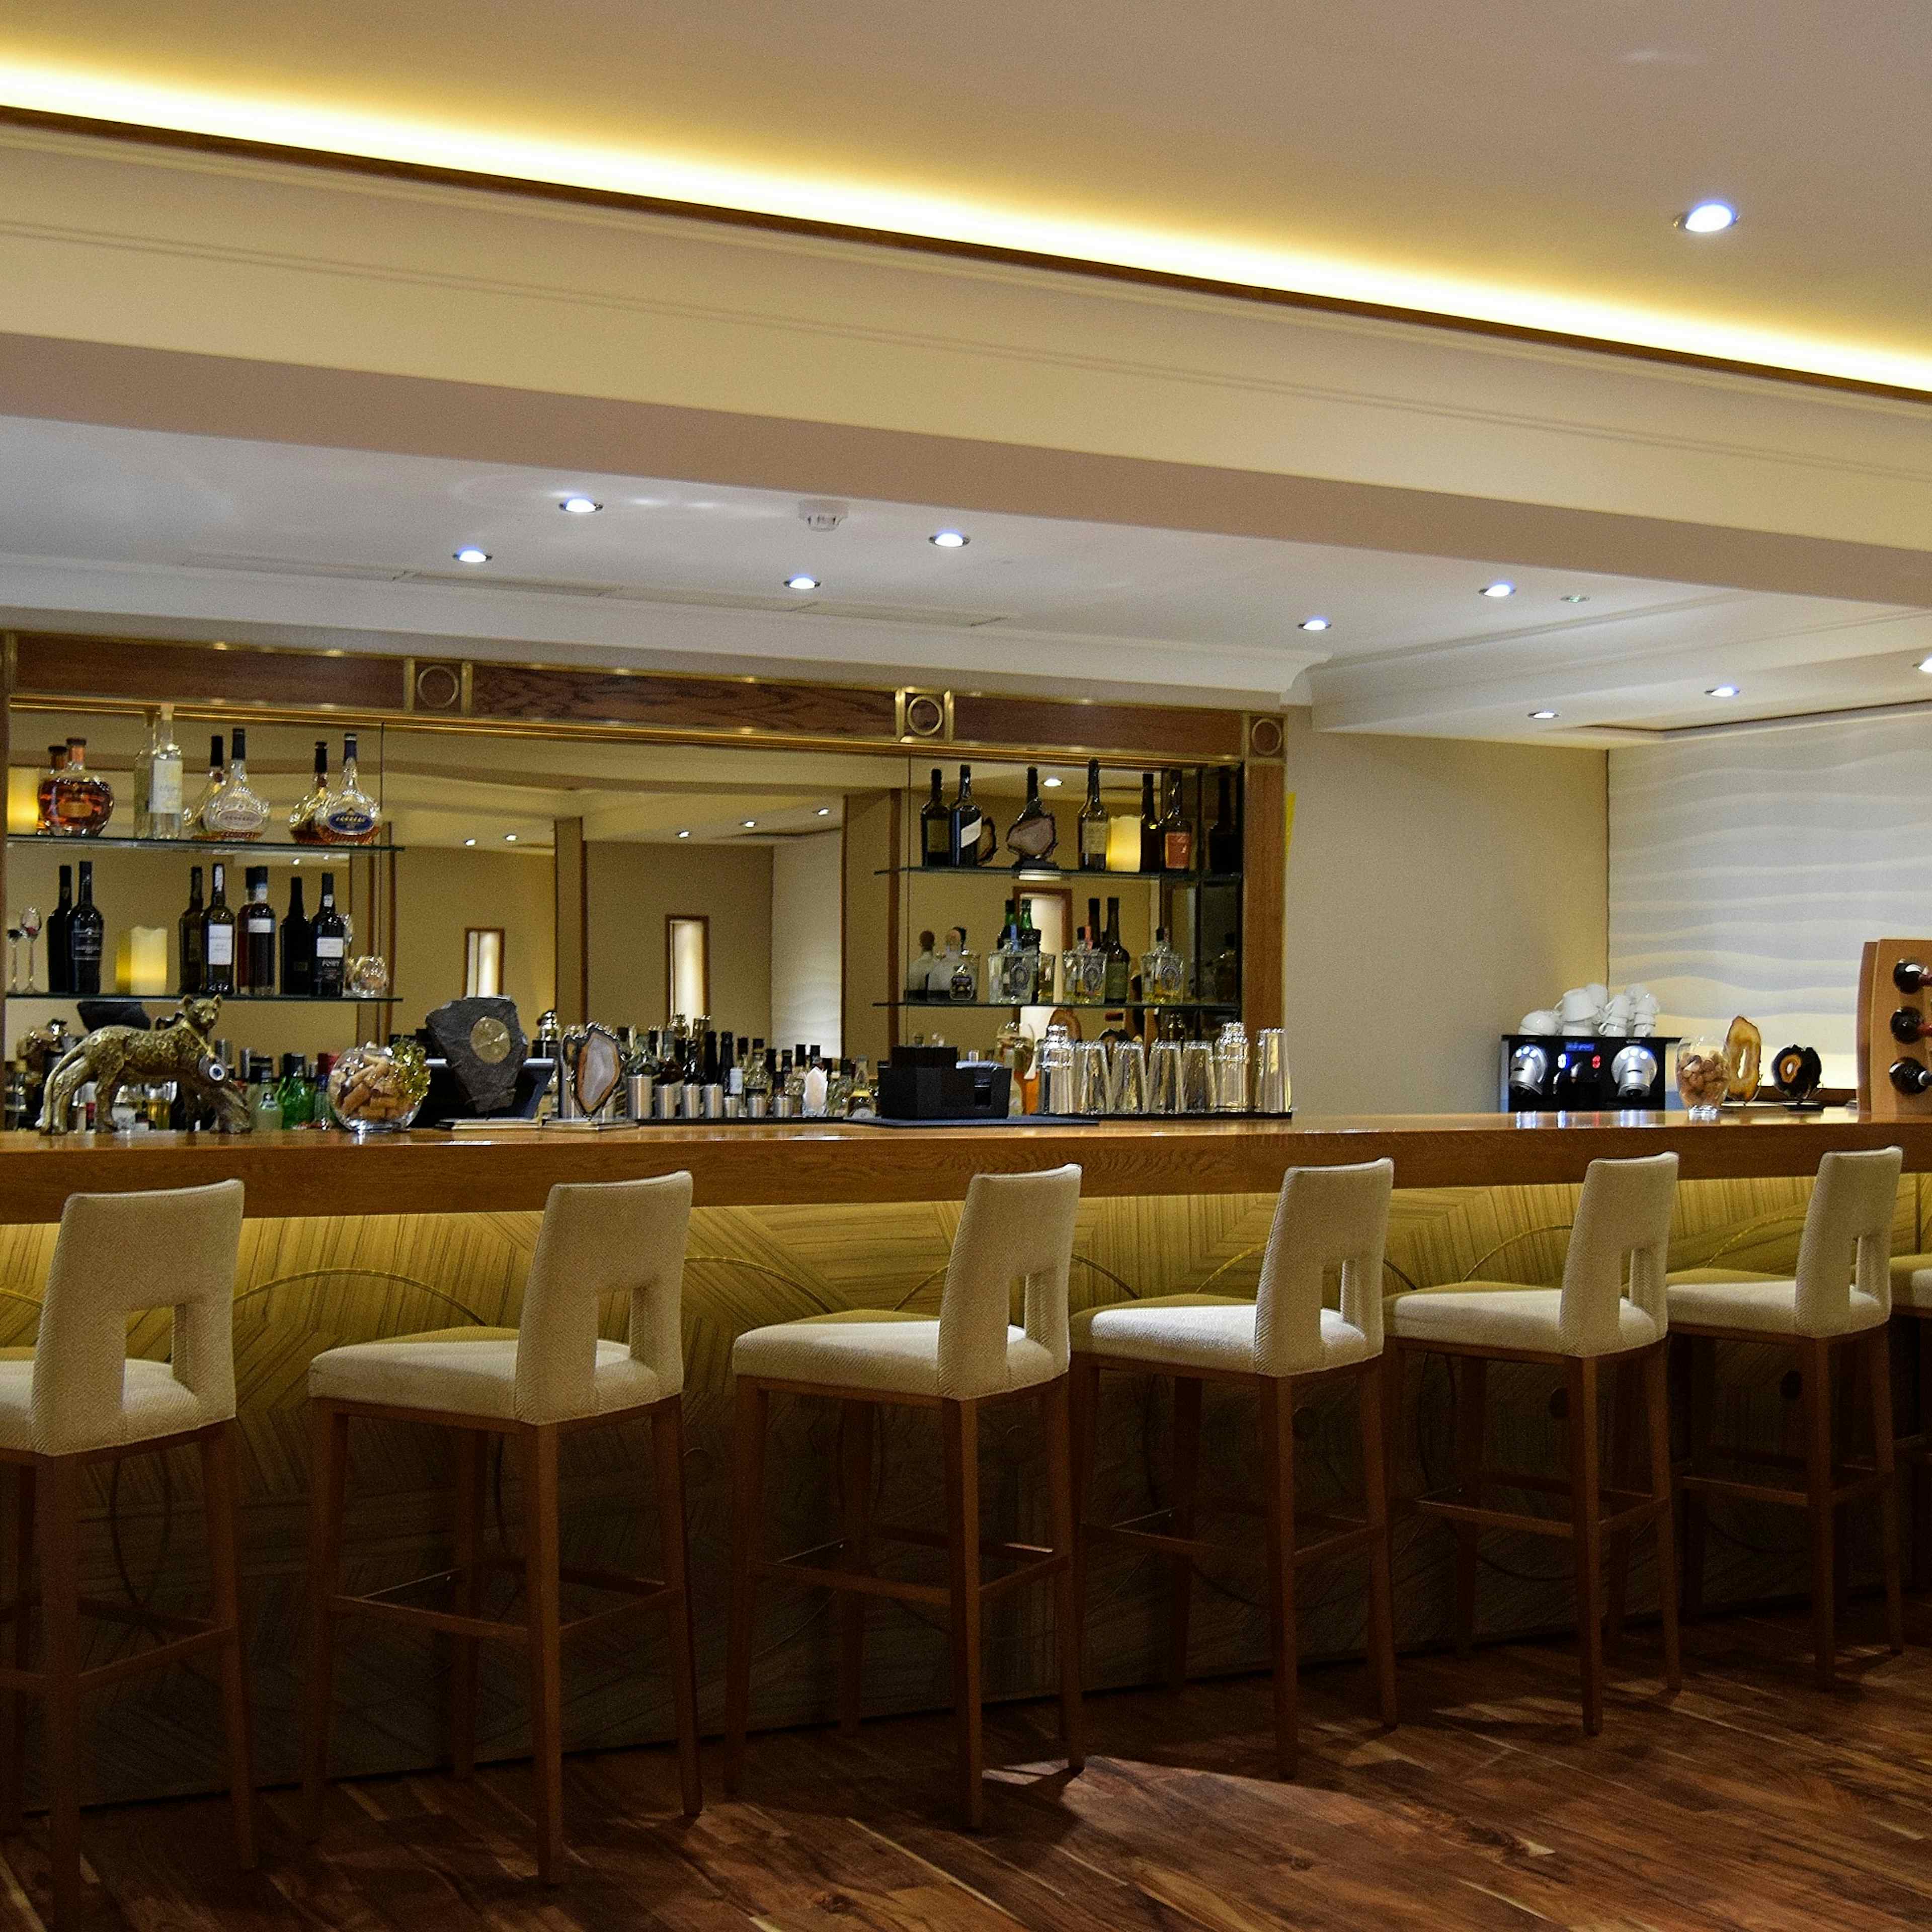 Alexandrie Restaurant - Coloured Canyon Dining Room and Bar image 2